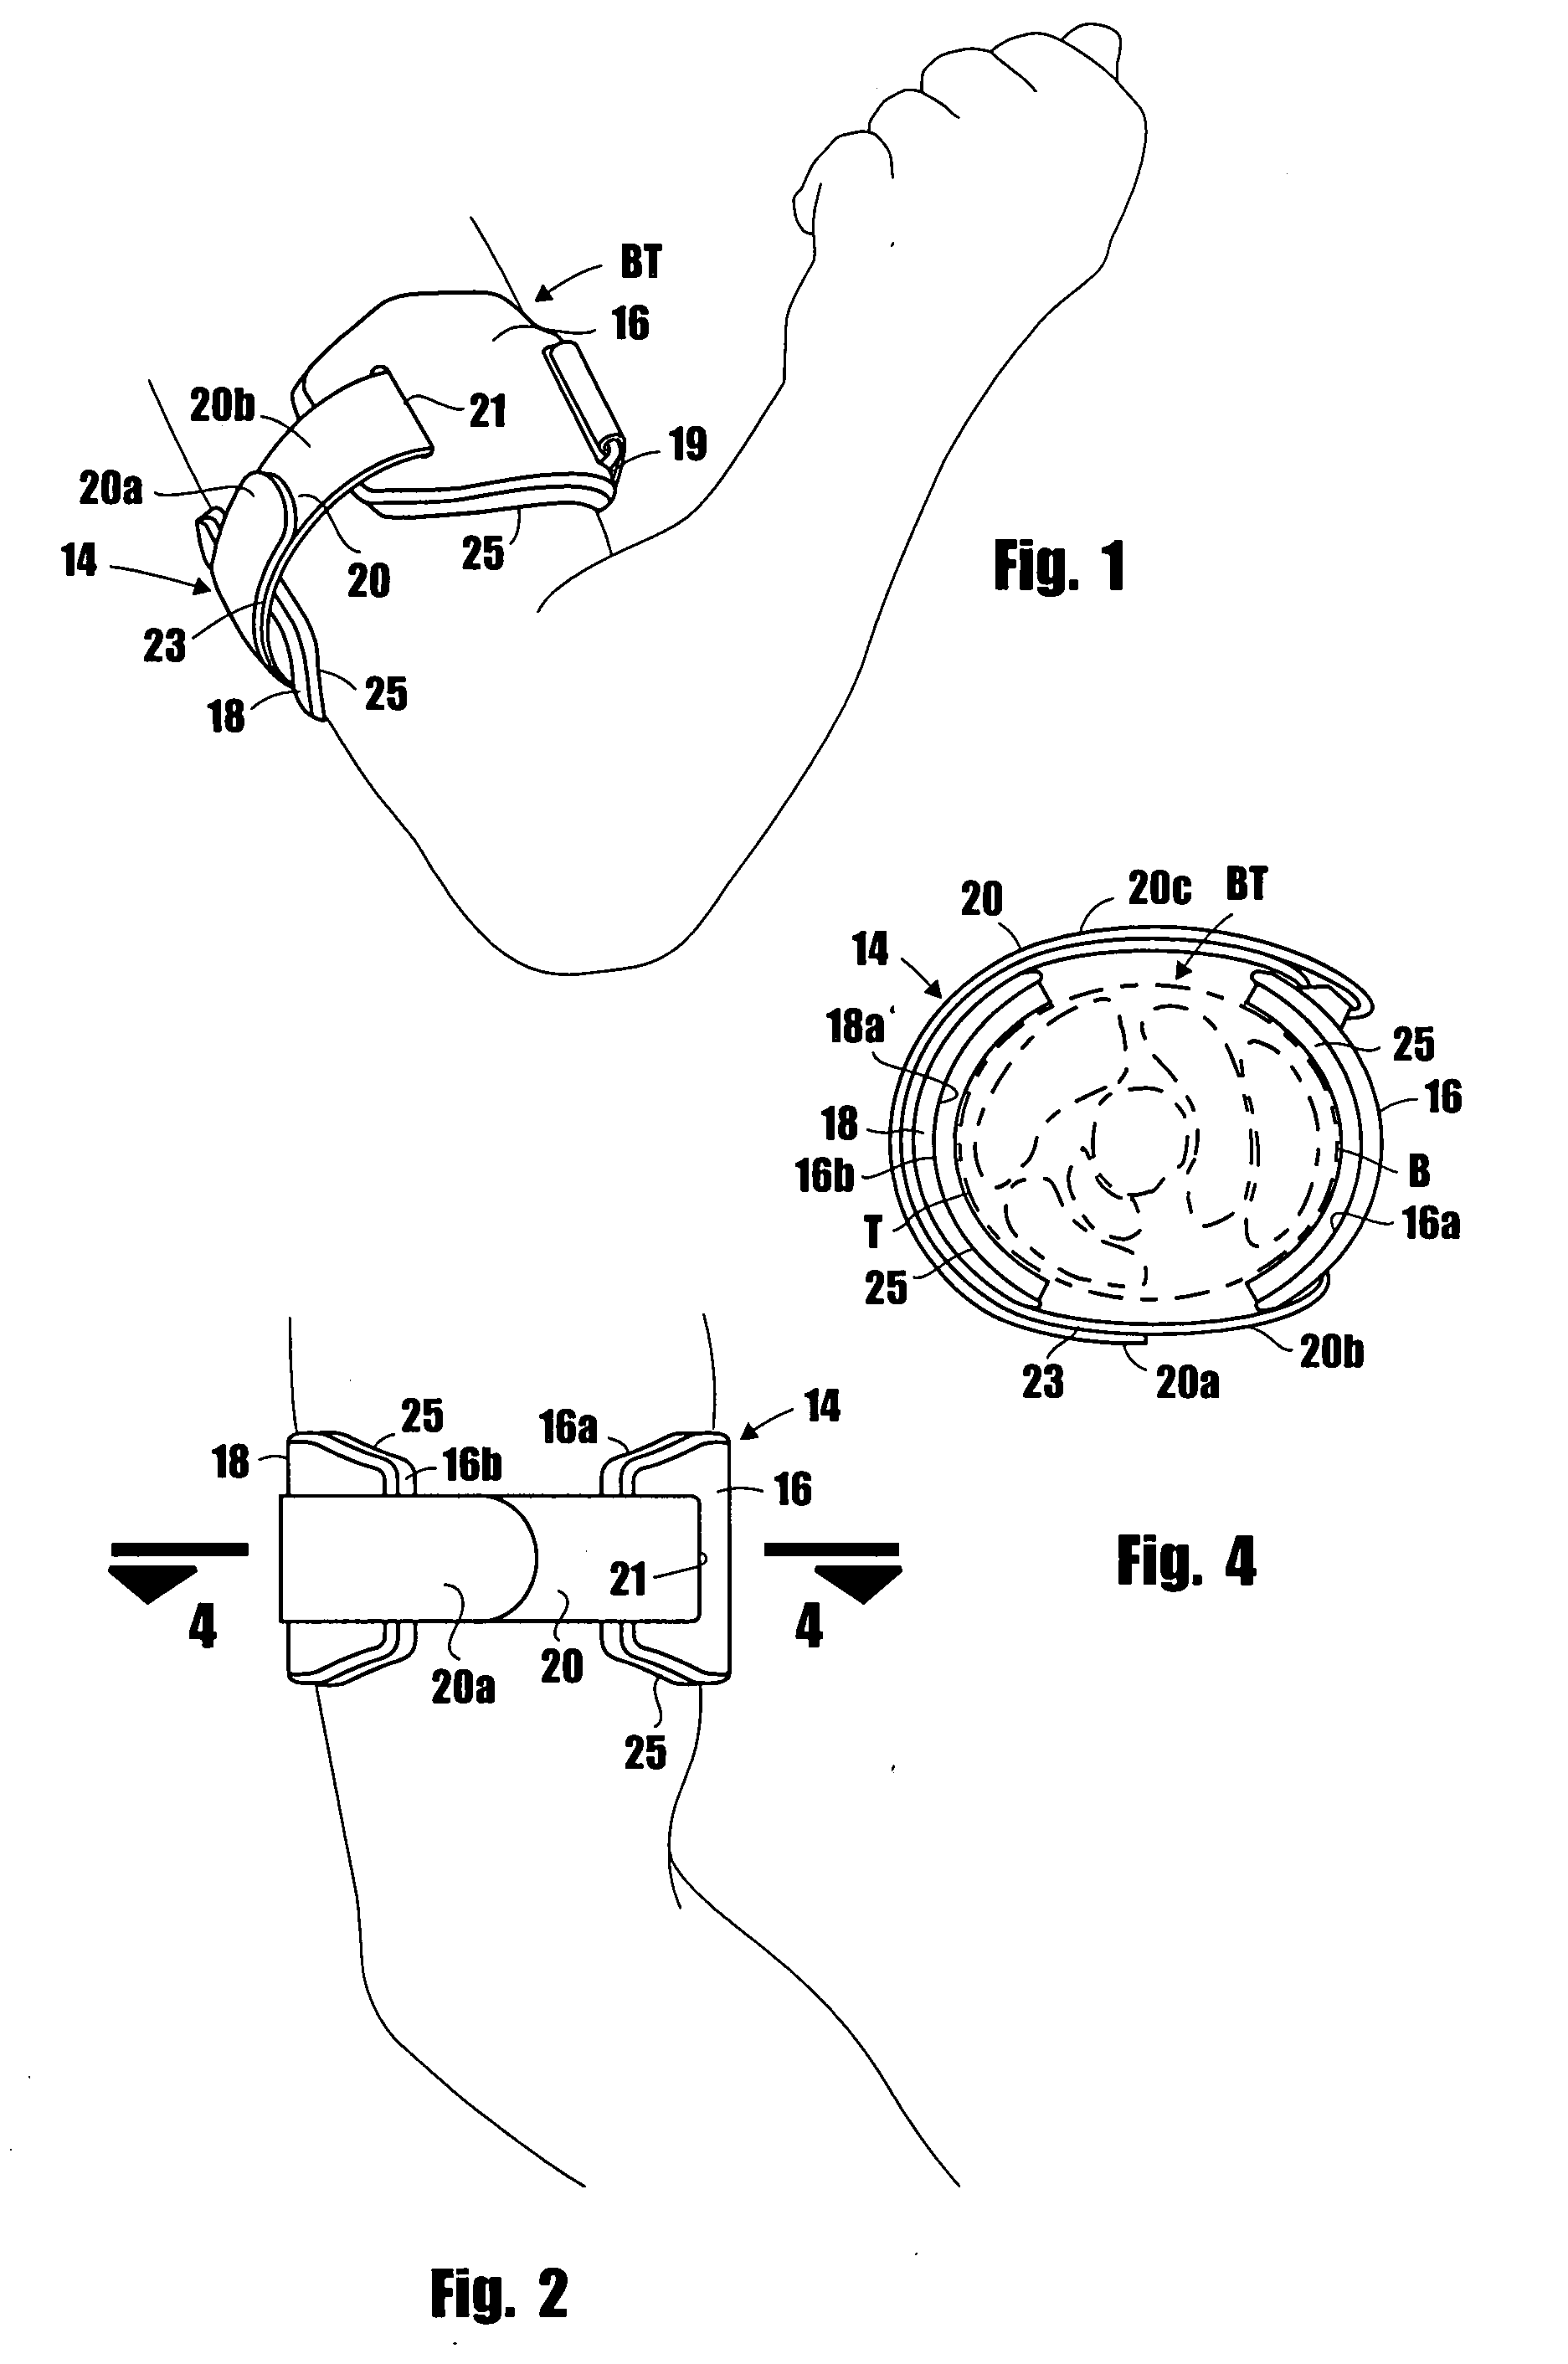 Apparatus for the treatment of arm disorders and the methods of using same